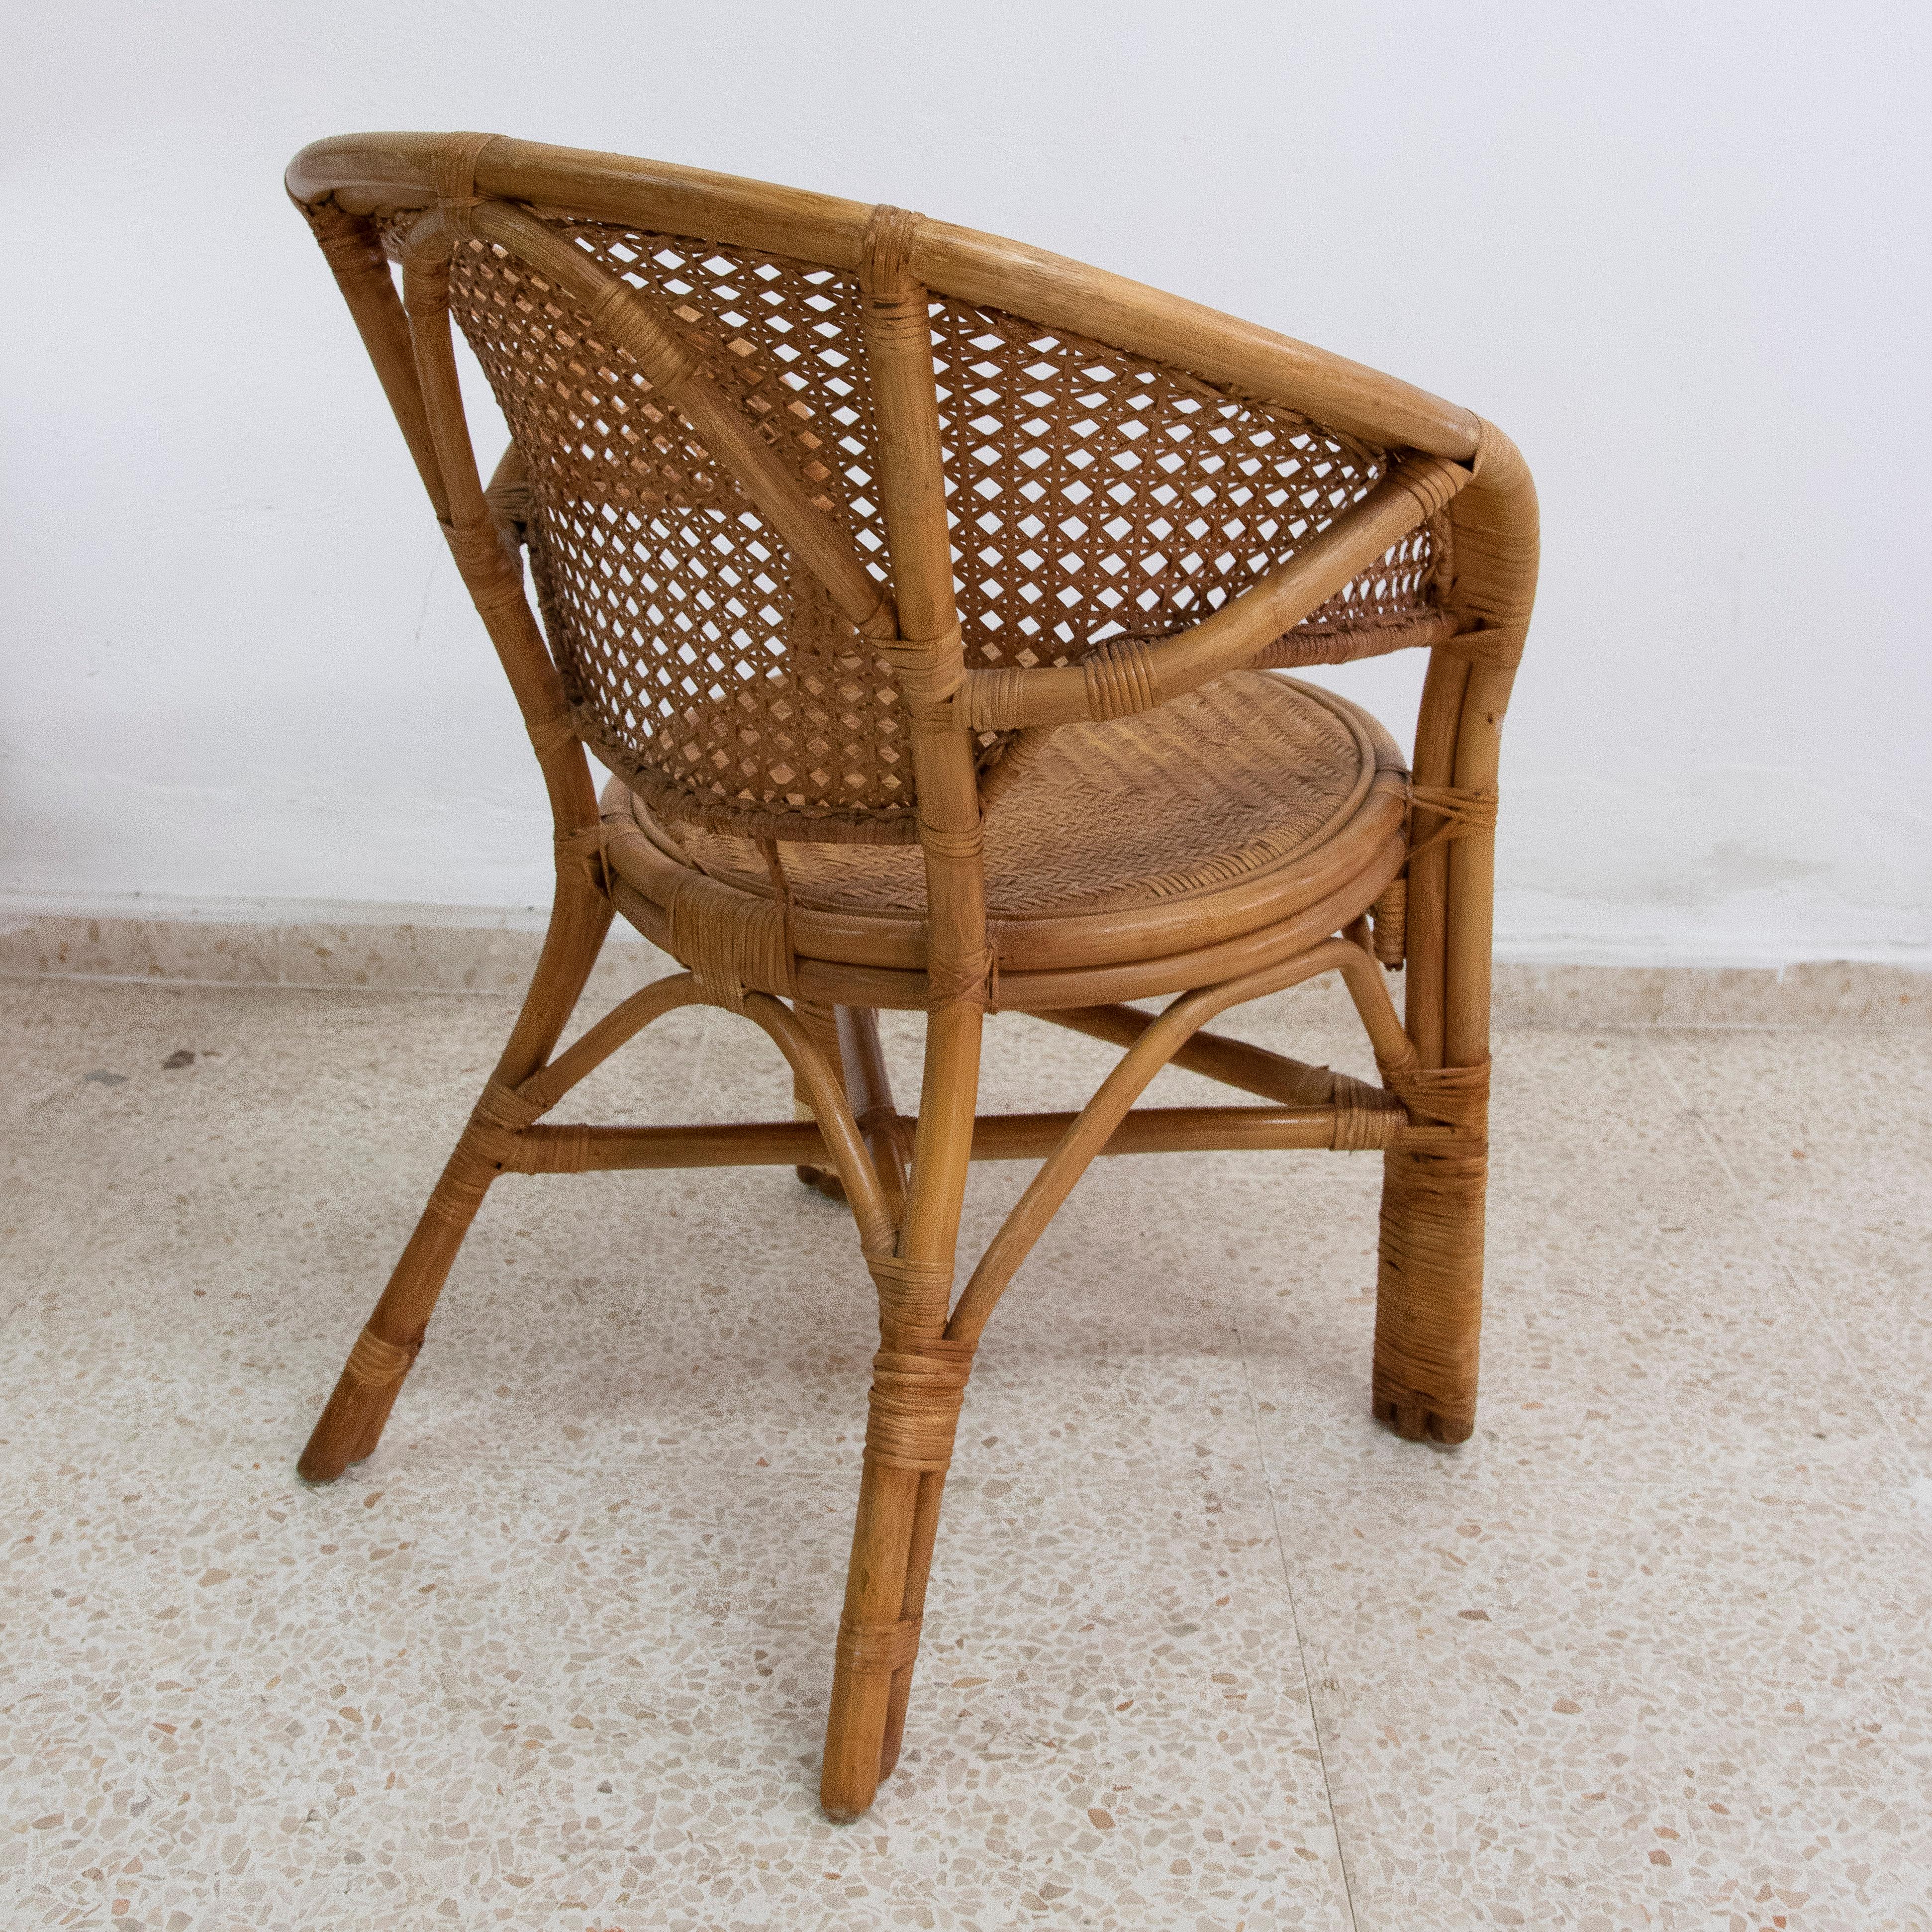 1950s Wicker and Bamboo Armchair with Mesh Backrest For Sale 2